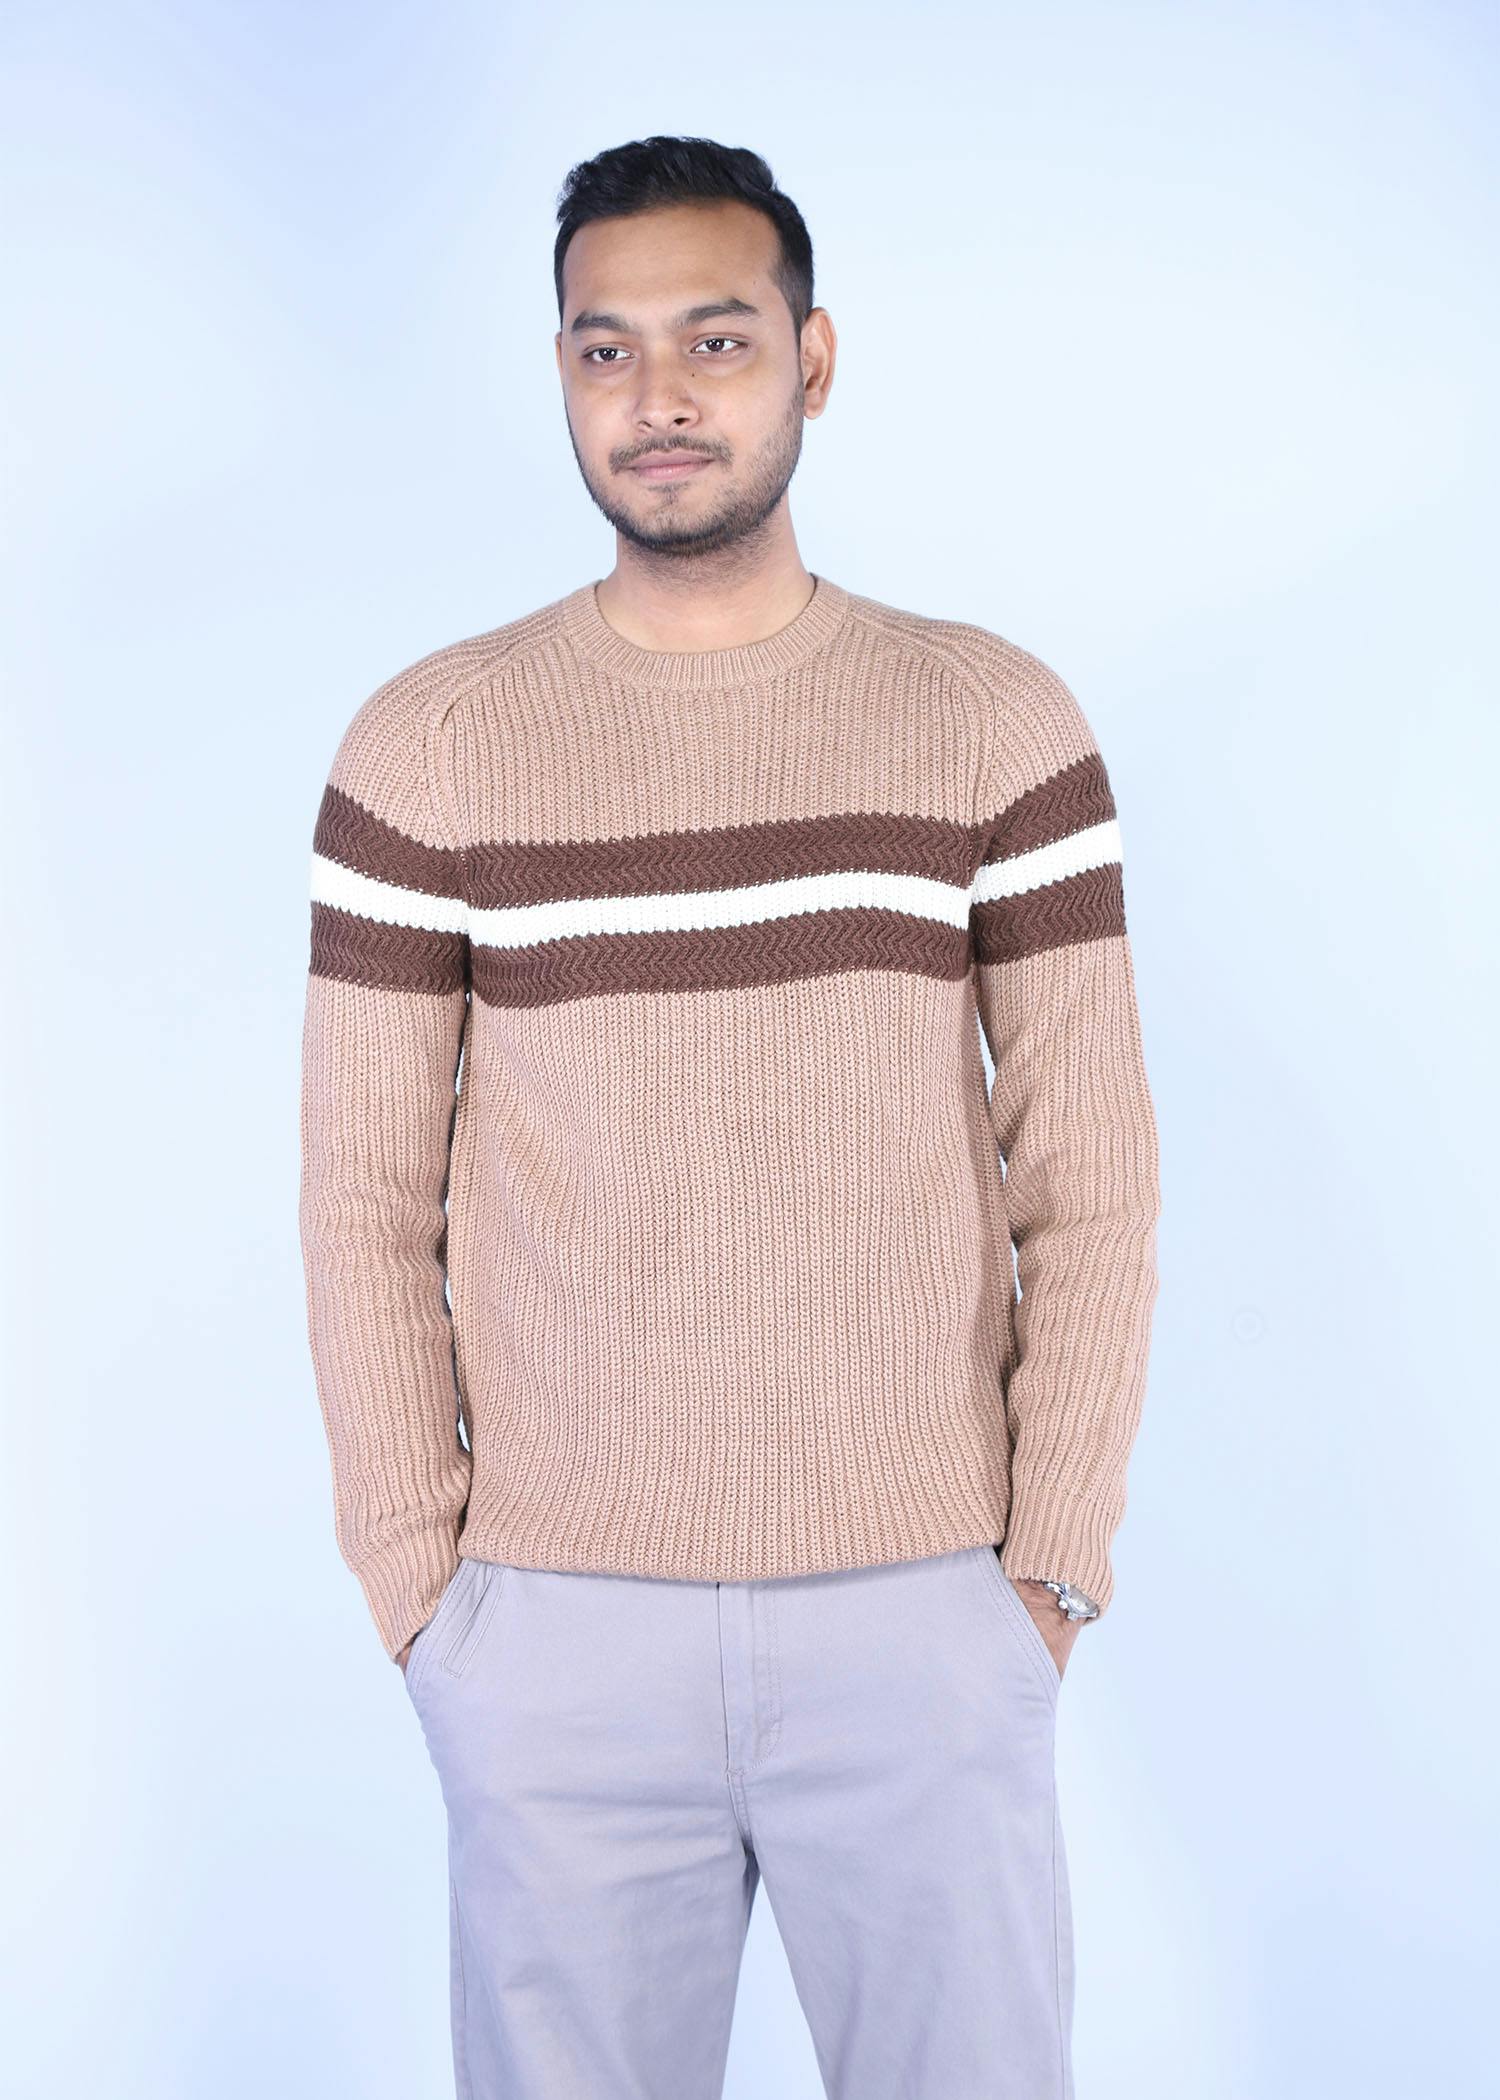 hillstar i sweater camel color half front view